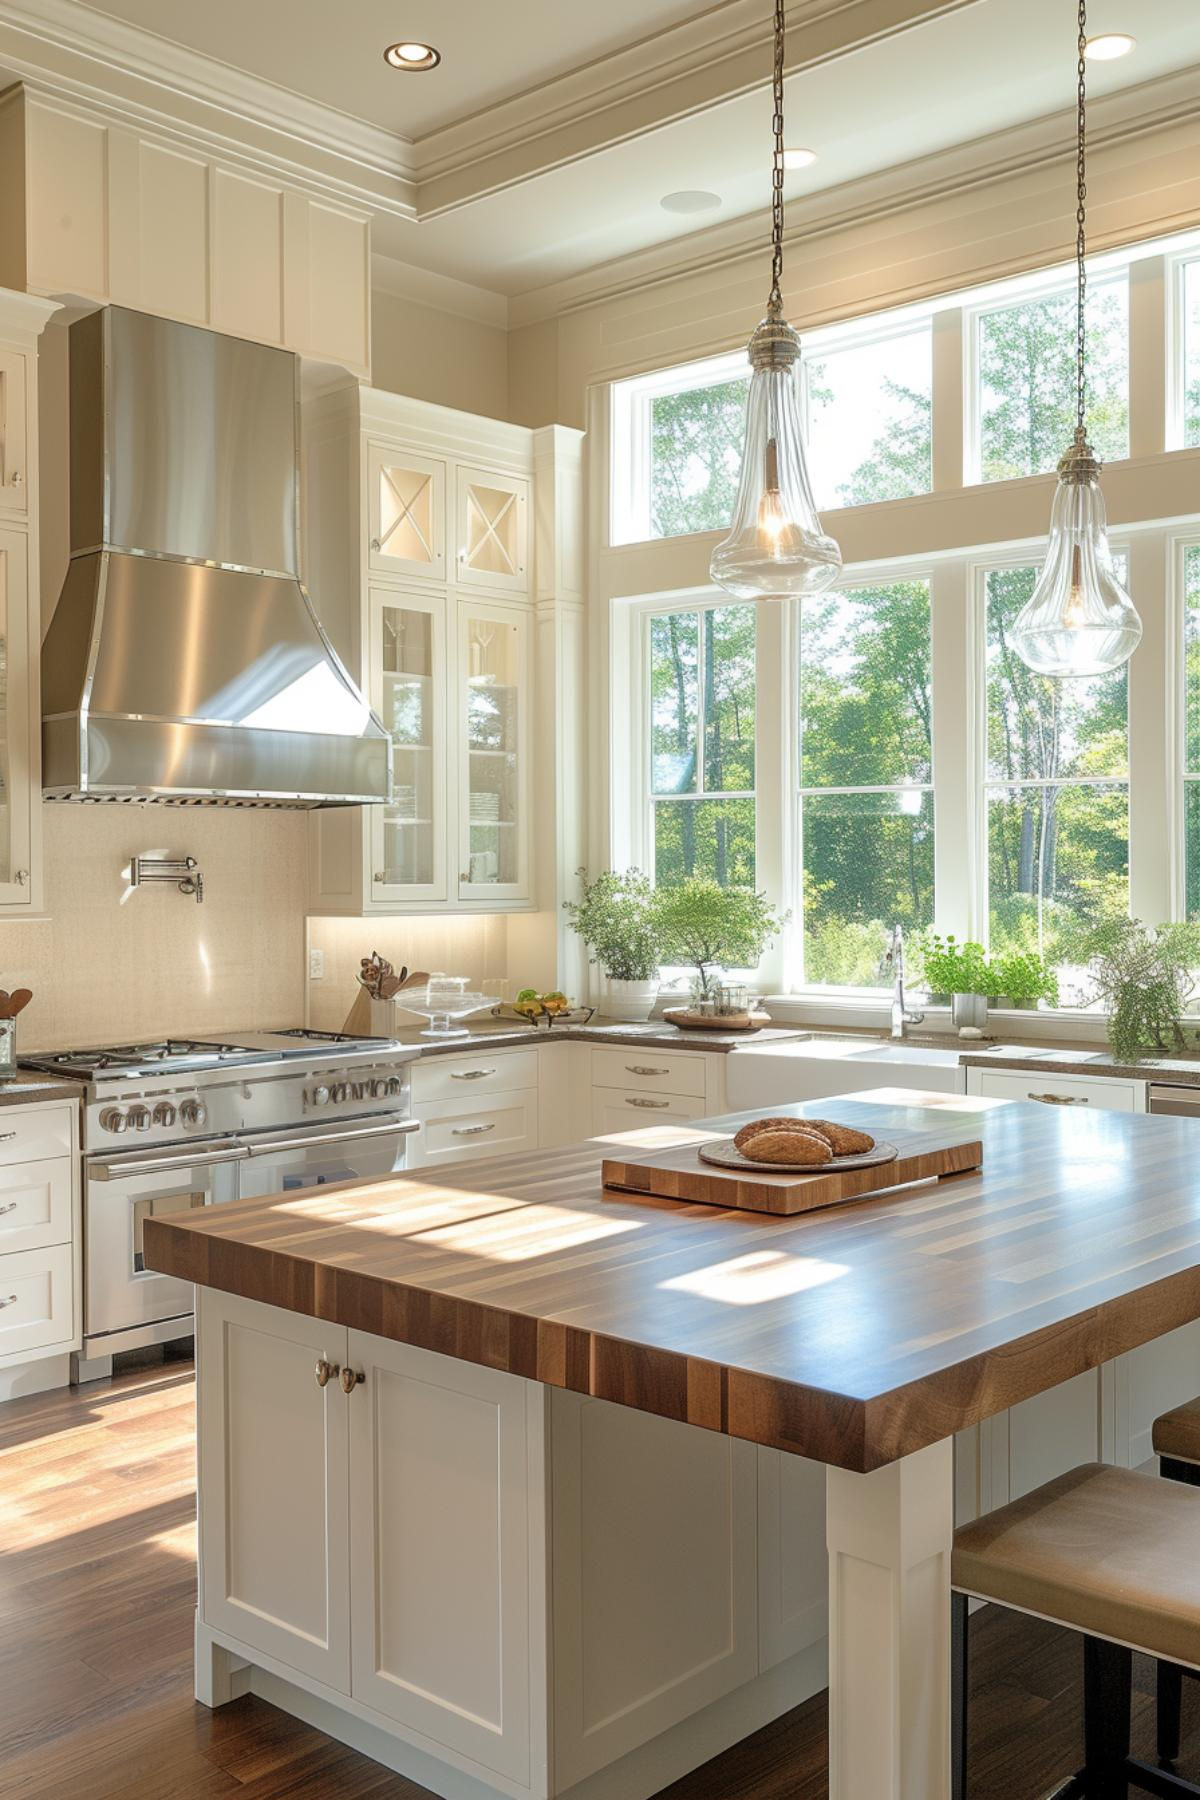 The Timeless Charm of Butcher Block: Why an Island Countertop is a Must-Have in Your Kitchen